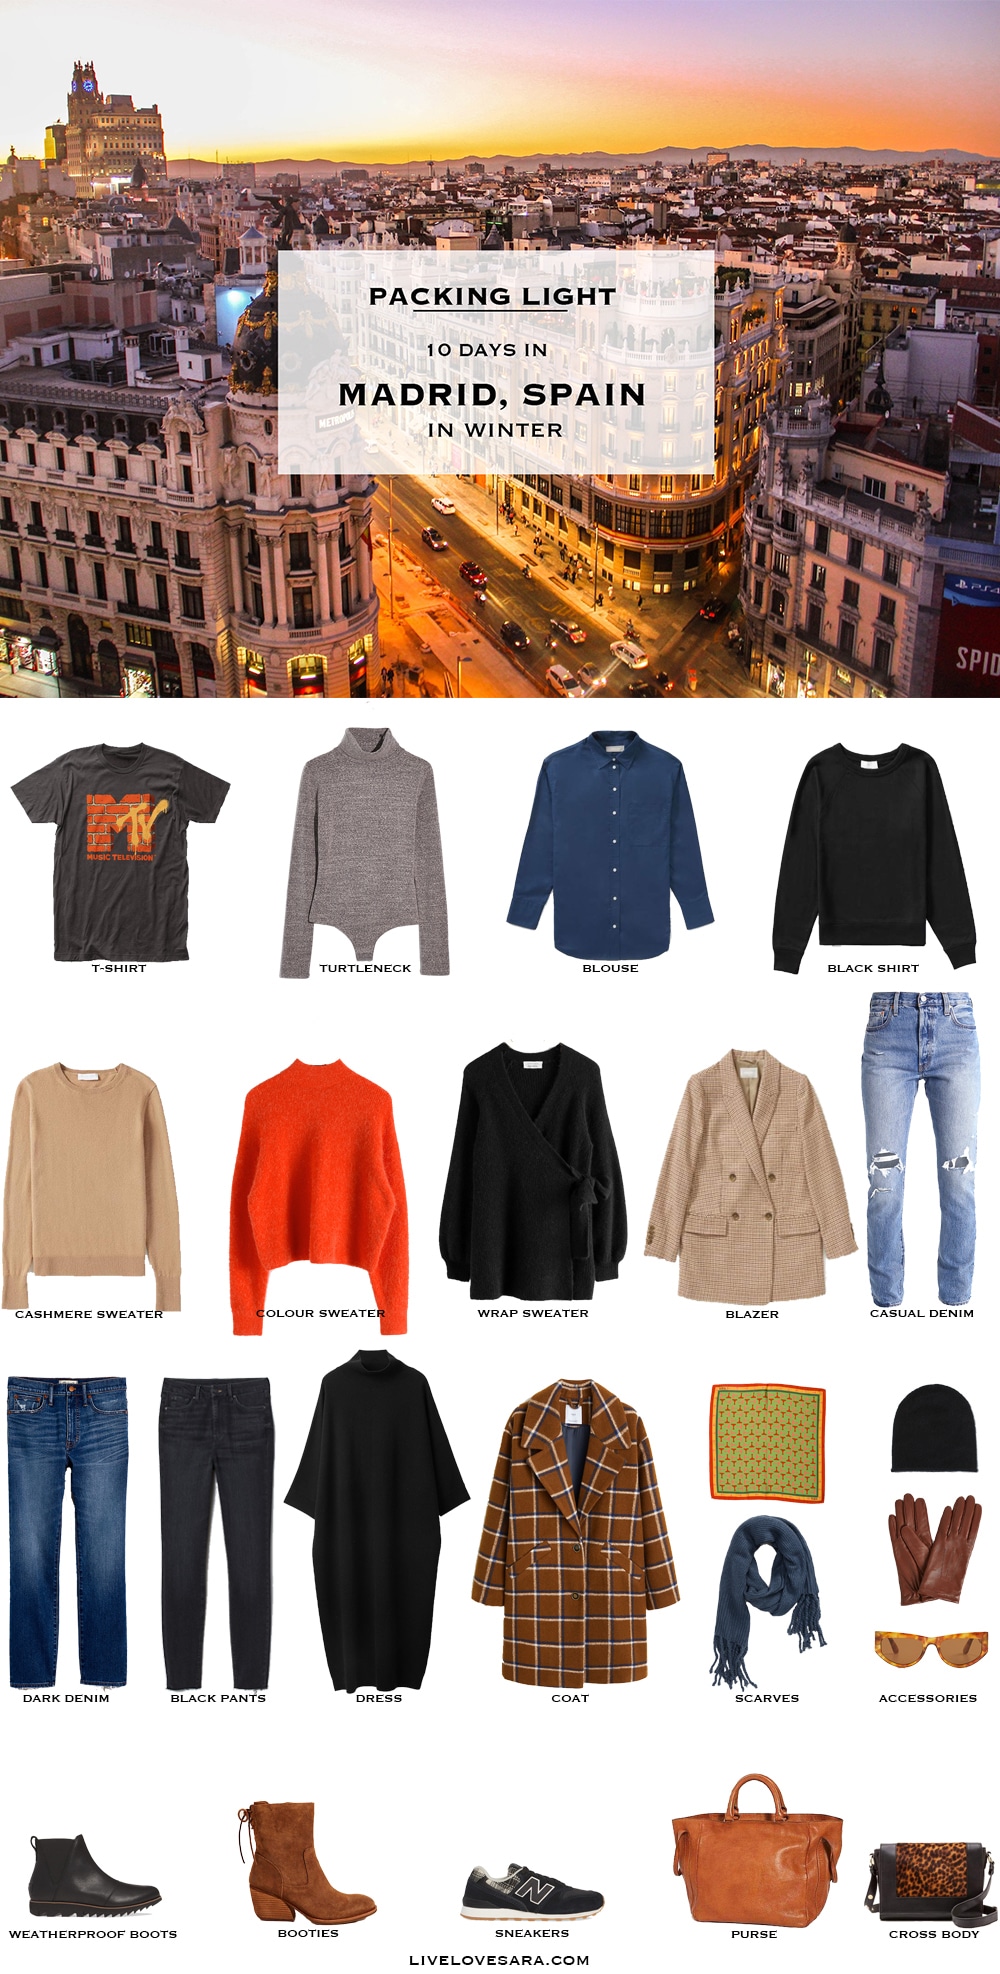 What to pack for Madrid packing list | Madrid Outfit Ideas | What to Wear in Madrid | Spain Packing list | Winter Packing List | What to Wear in Spain | Spain Outfits Ideas | Packing Light | Capsule Wardrobe | travel wardrobe | Fall packing list | travel capsule | livelovesara